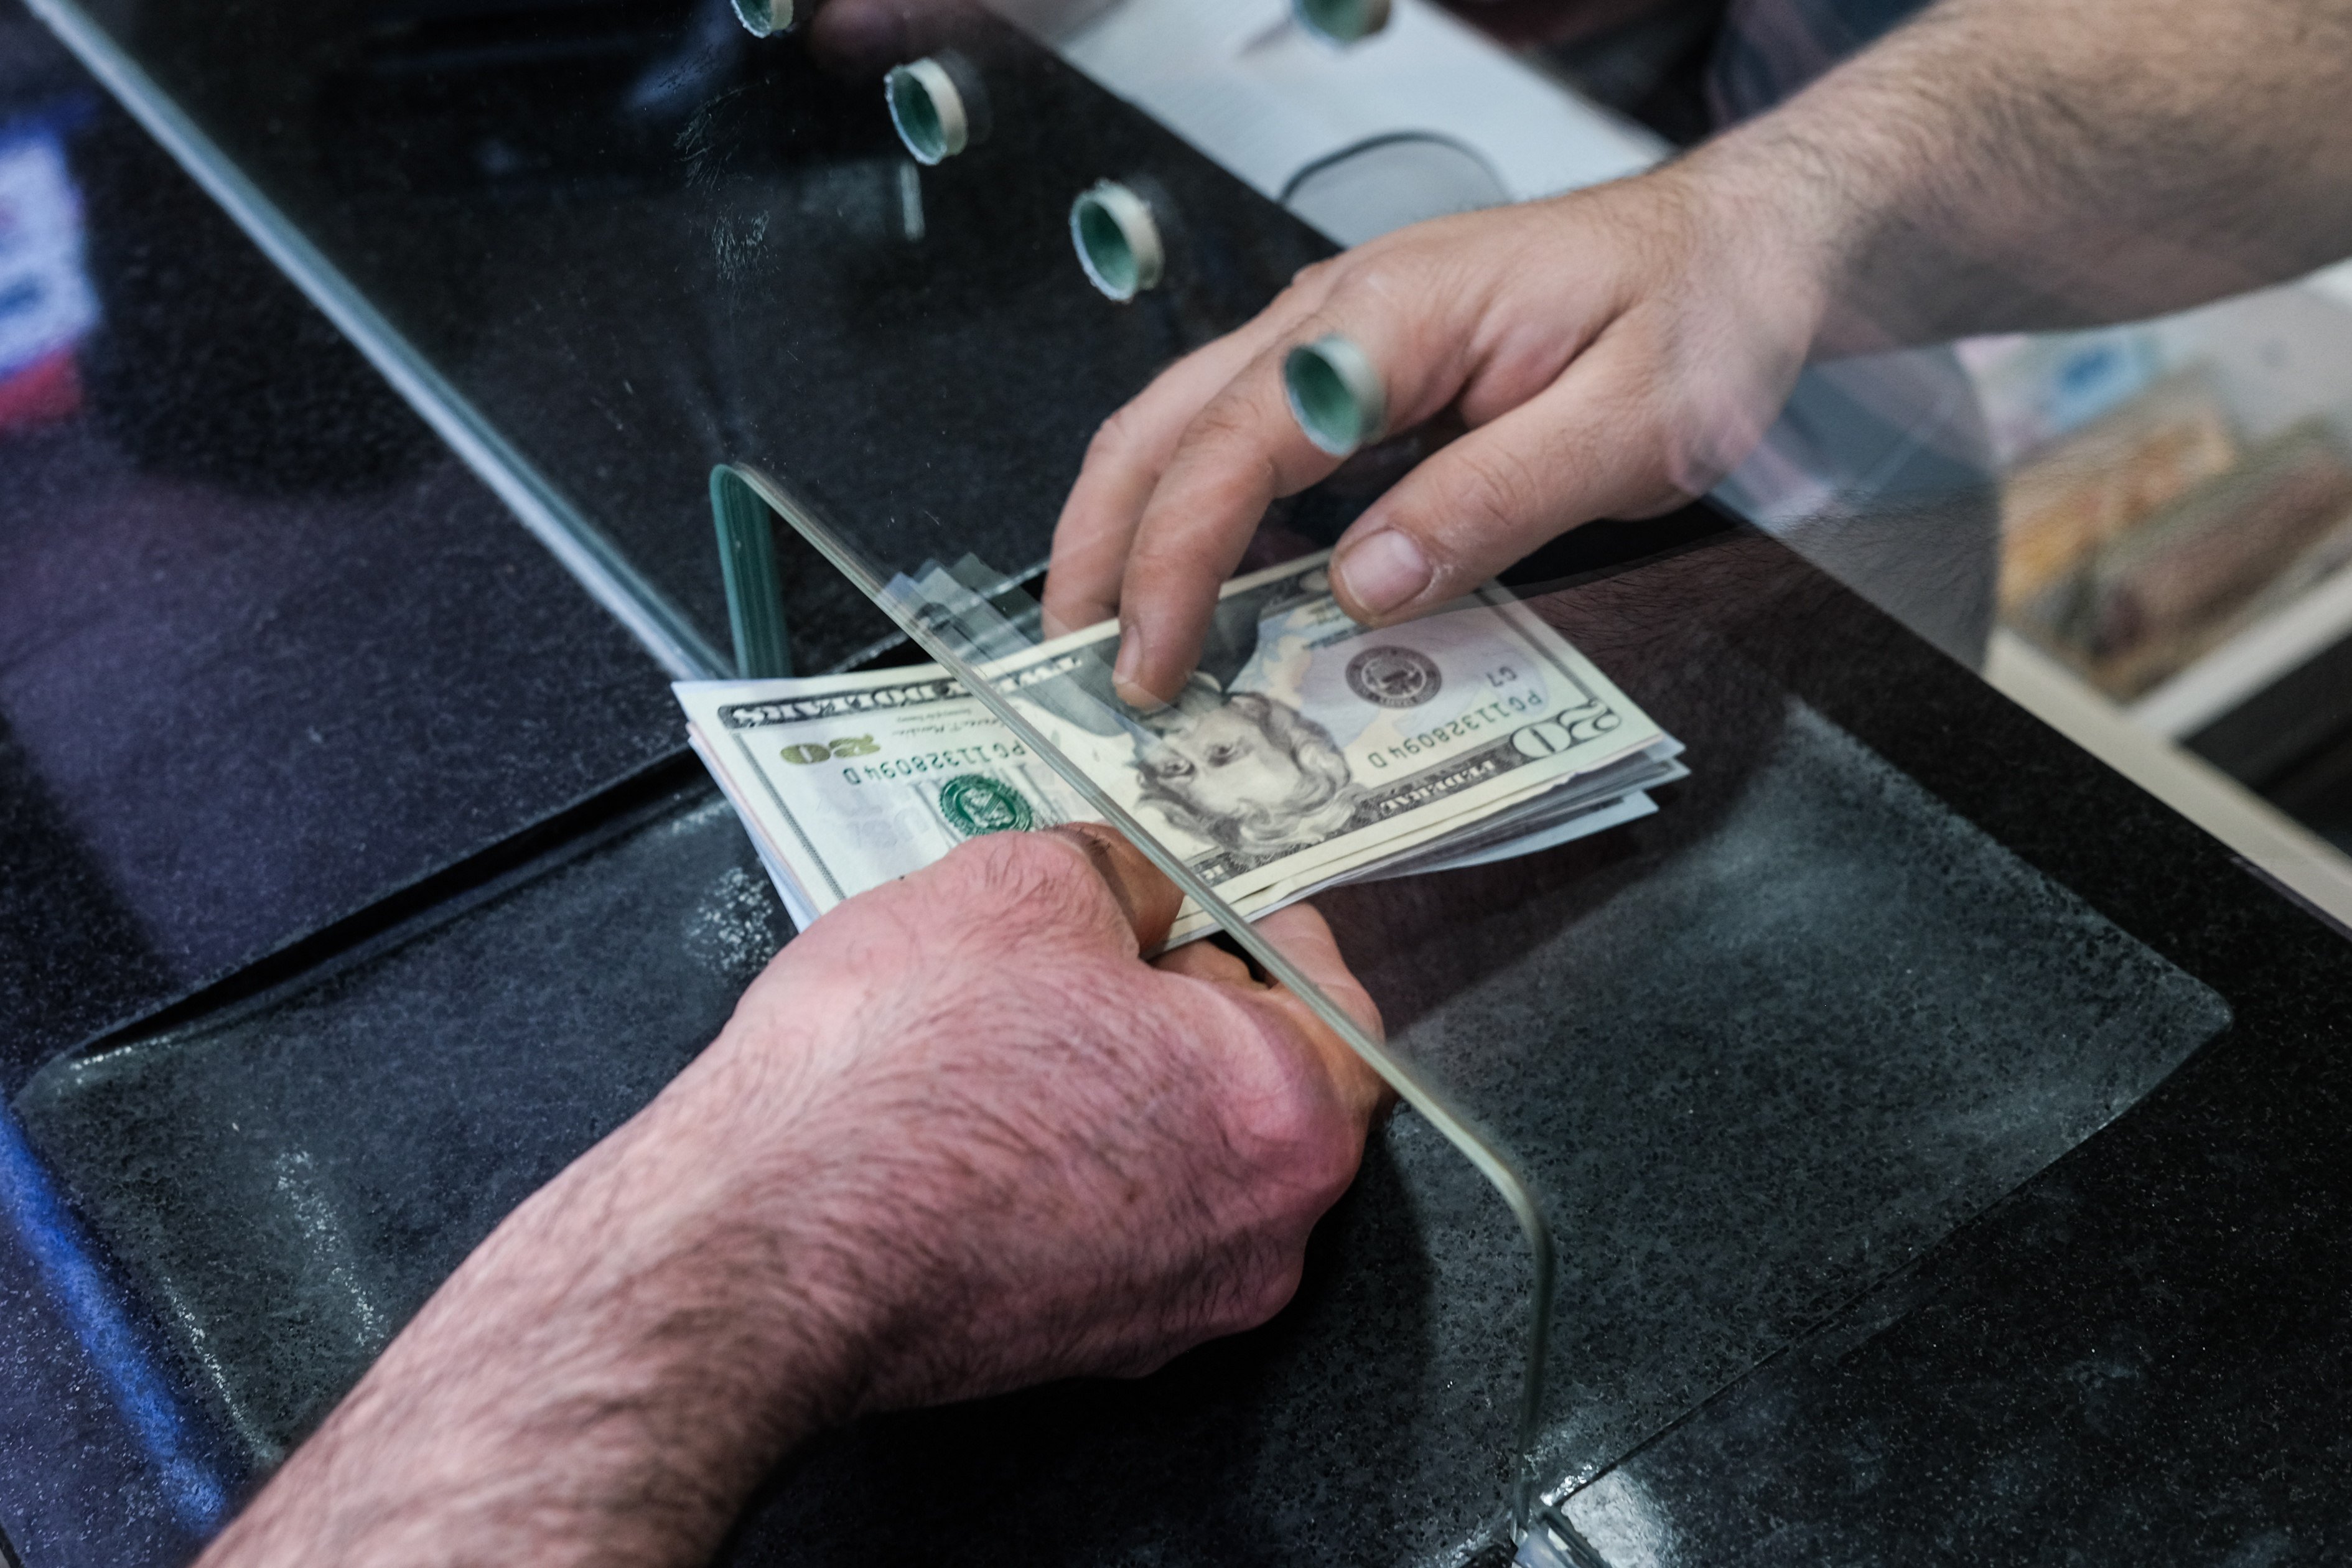 A tourist exchanges money in Istanbul on June 7. While a more multipolar world poses bigger challenges to the dollar, the powerful forces underpinning its hold on the global economy endure. Photo: EPA-EFE 